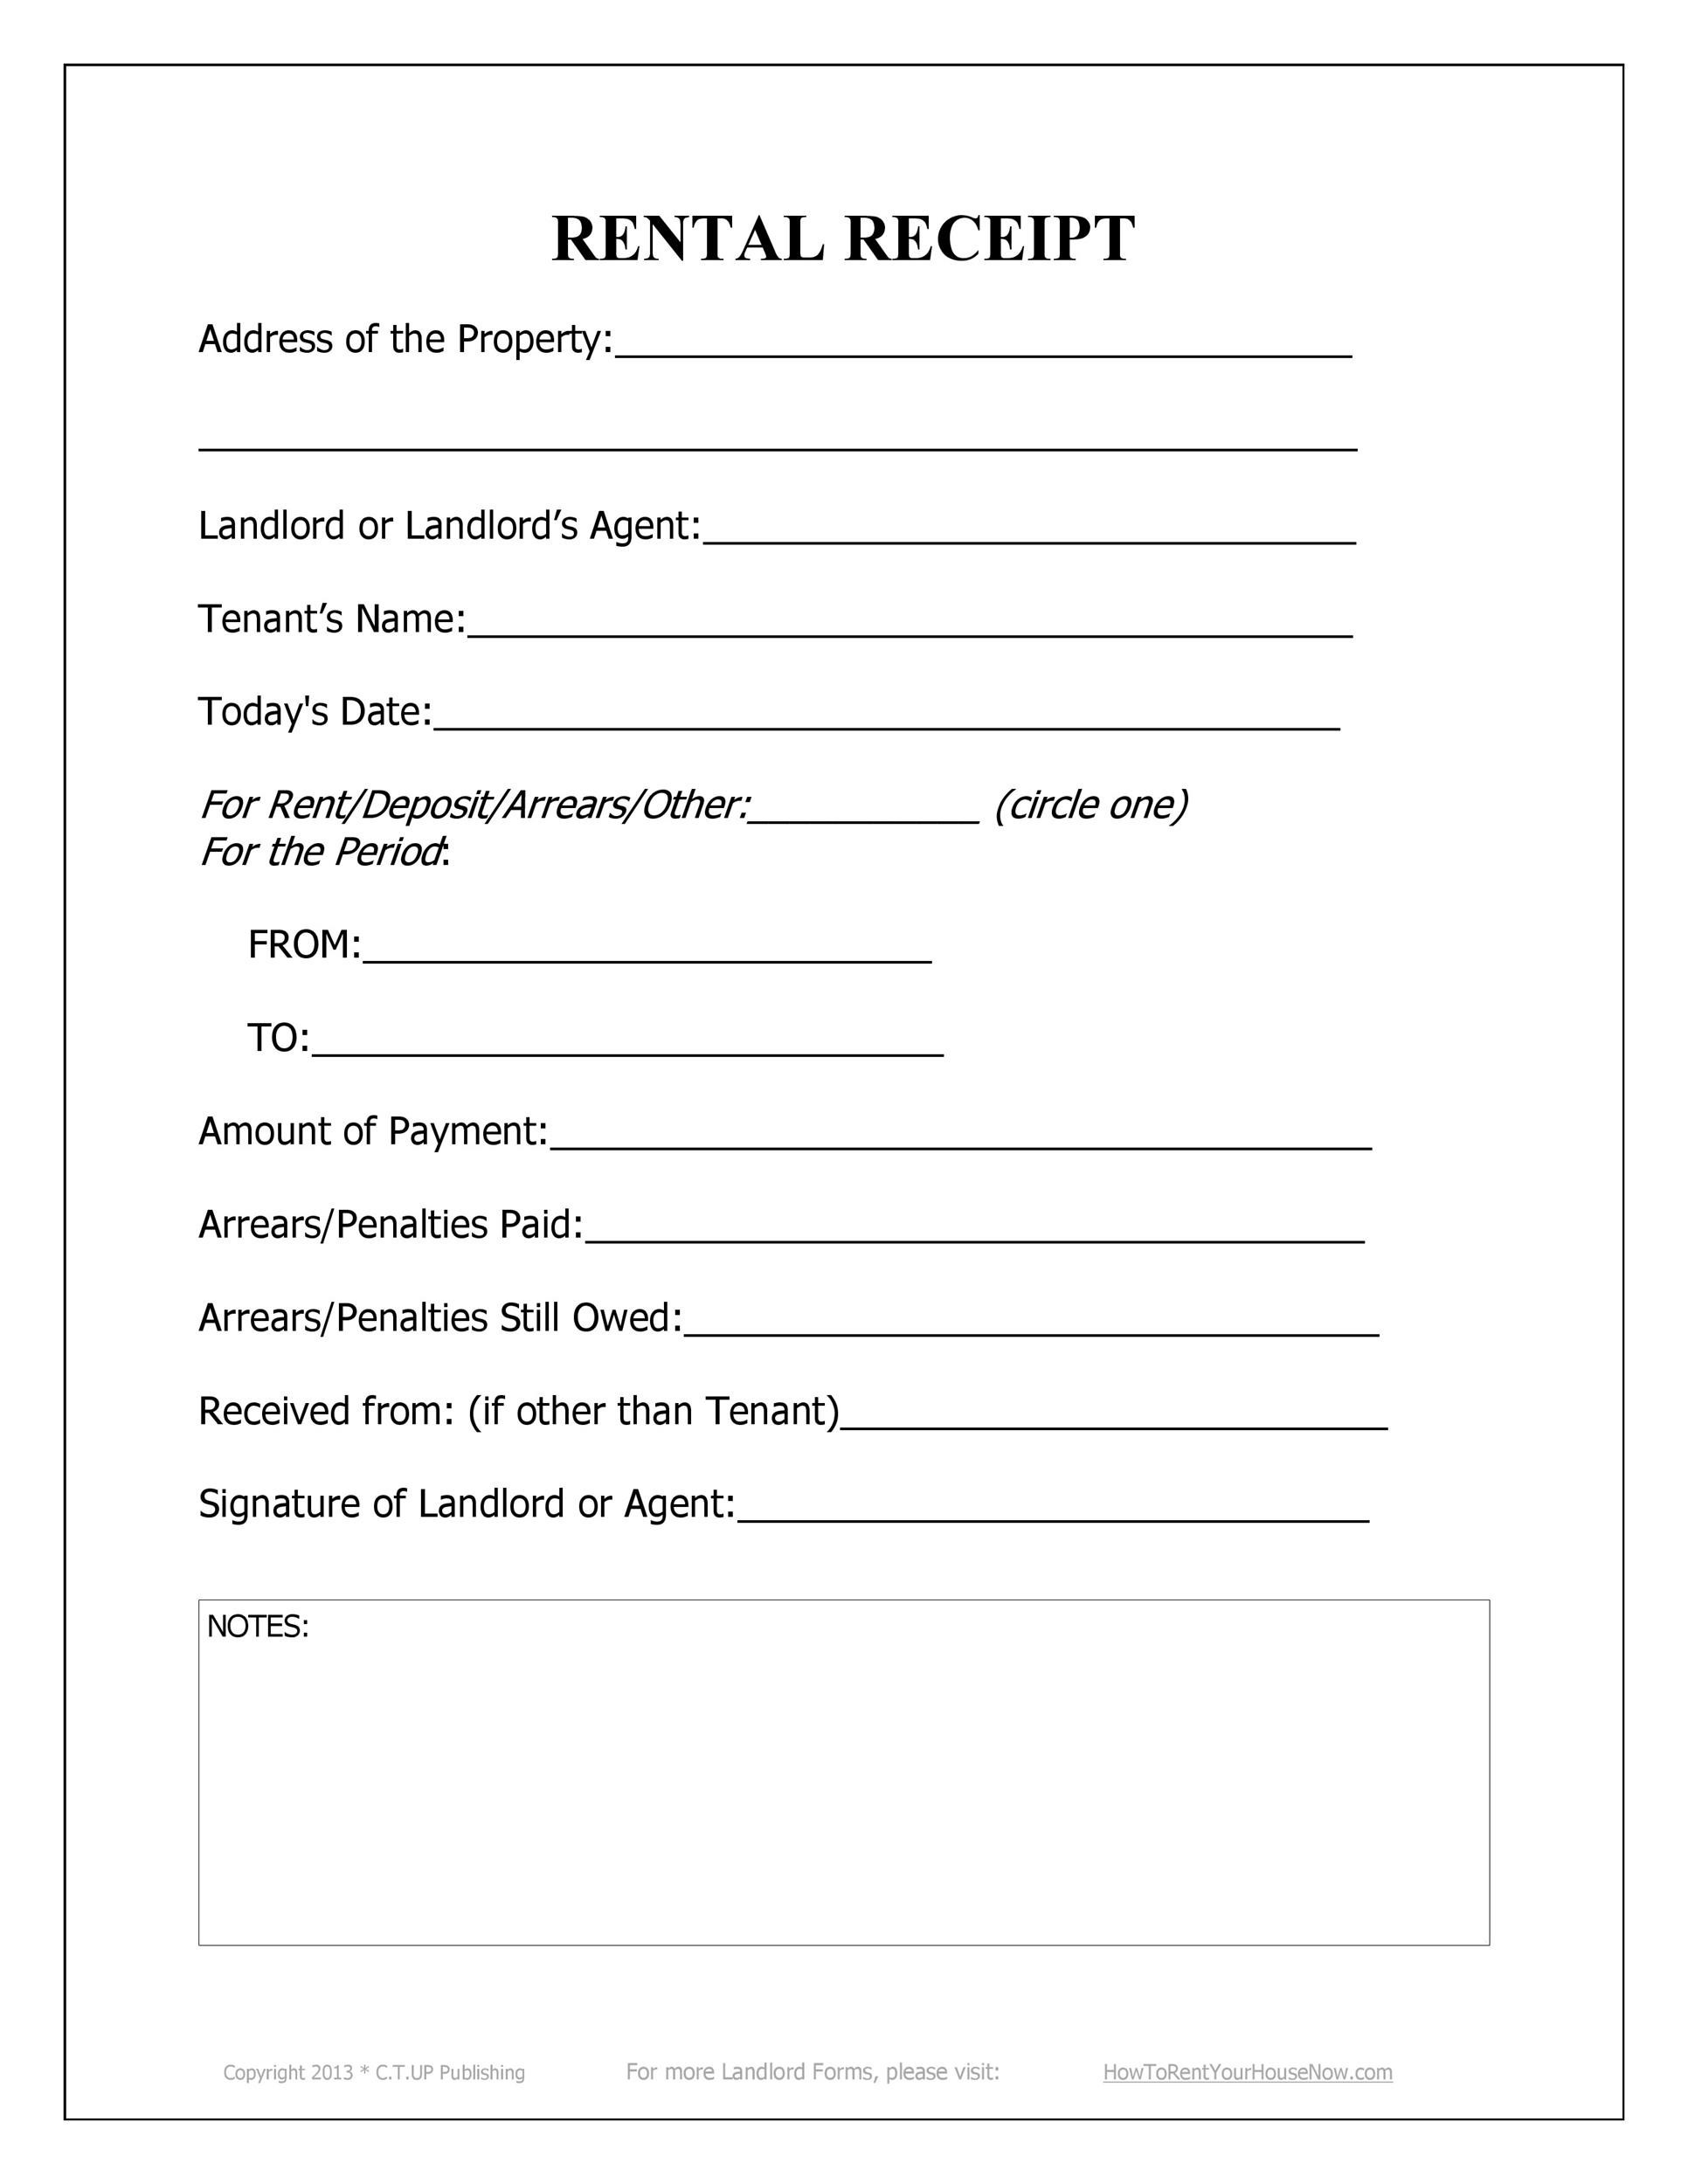 Security Deposit And First Month S Rent Receipt Template